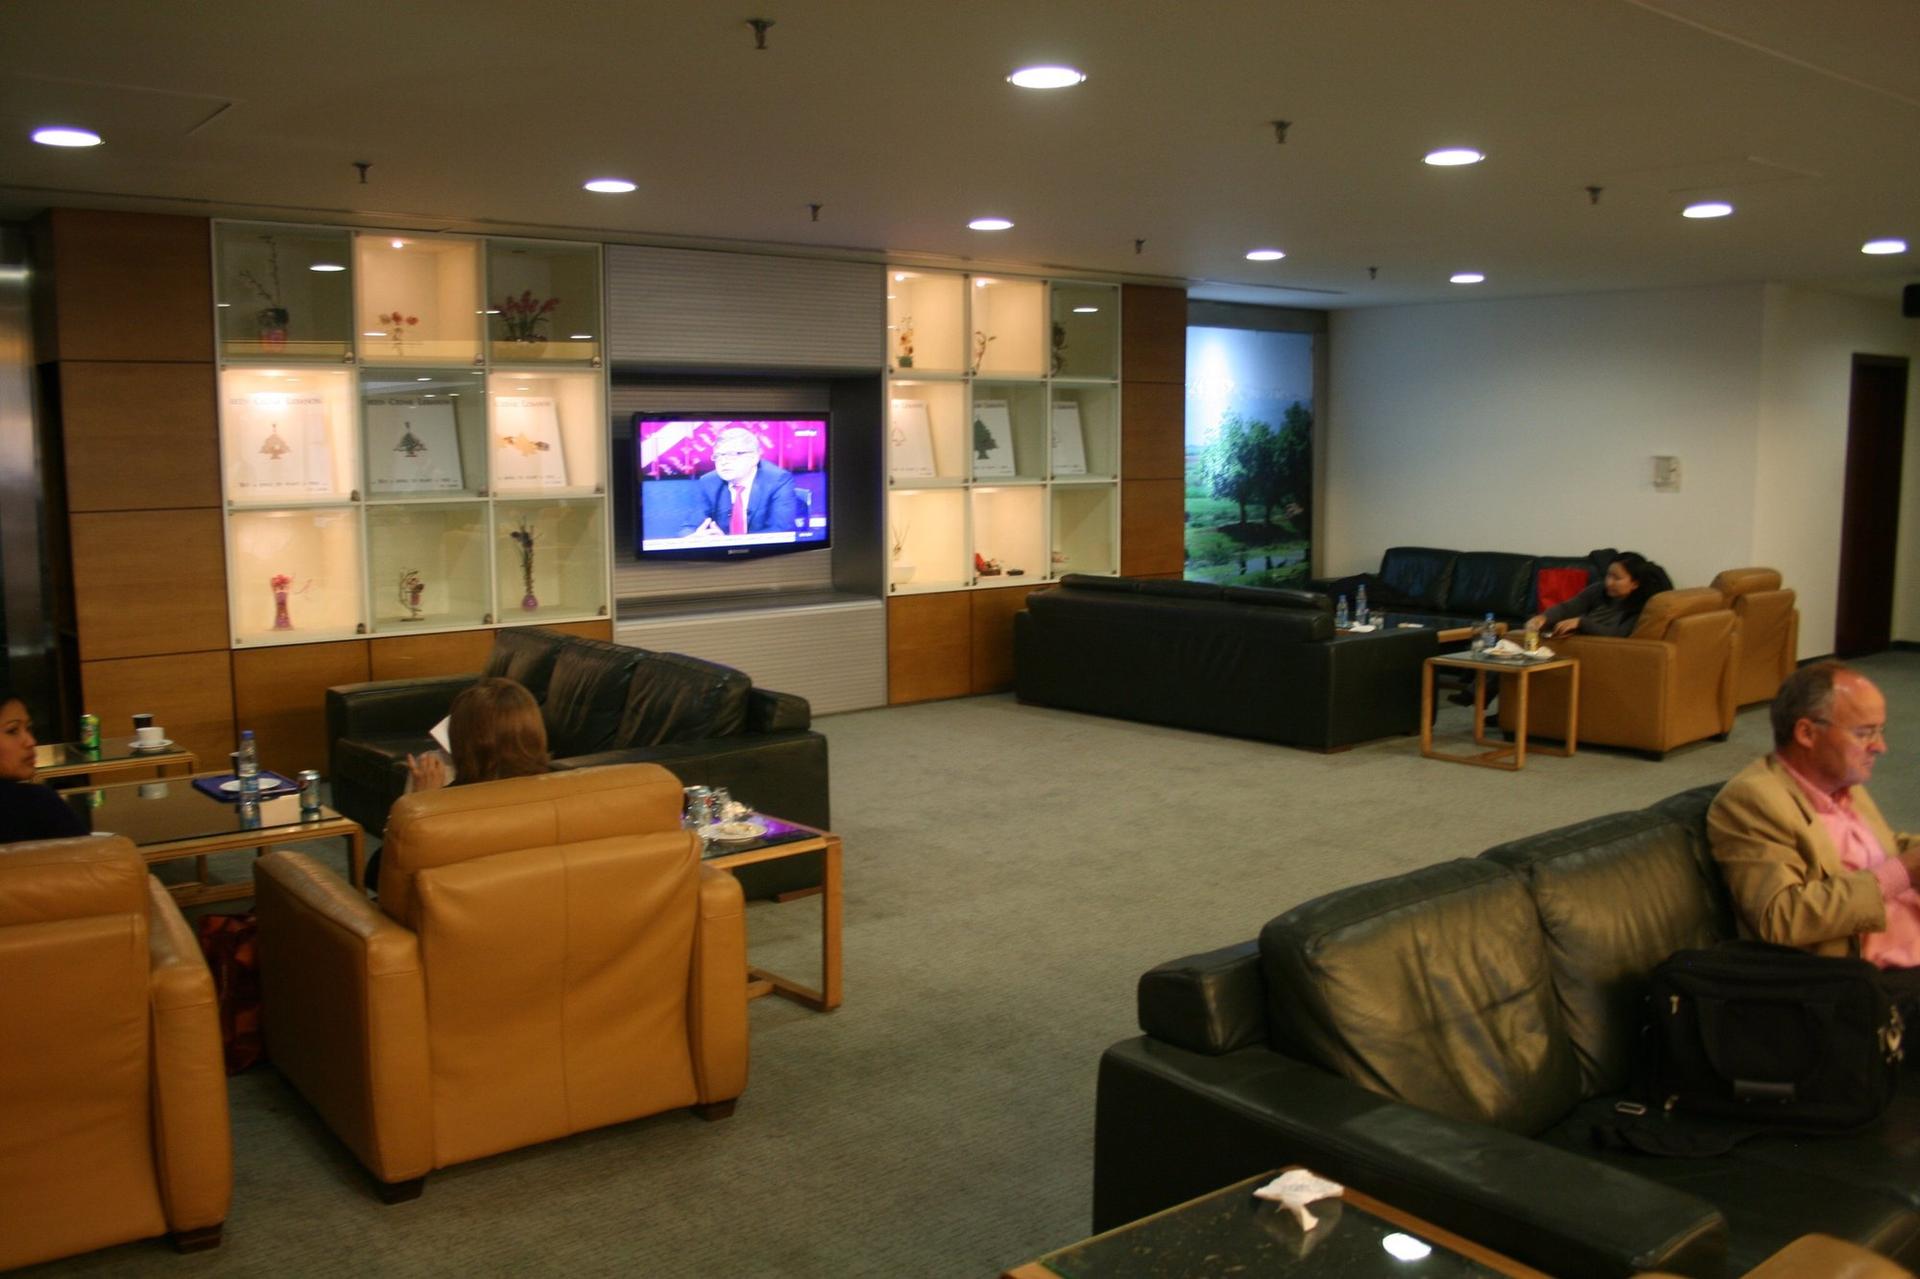 Middle East Airlines Cedar Lounge image 8 of 18